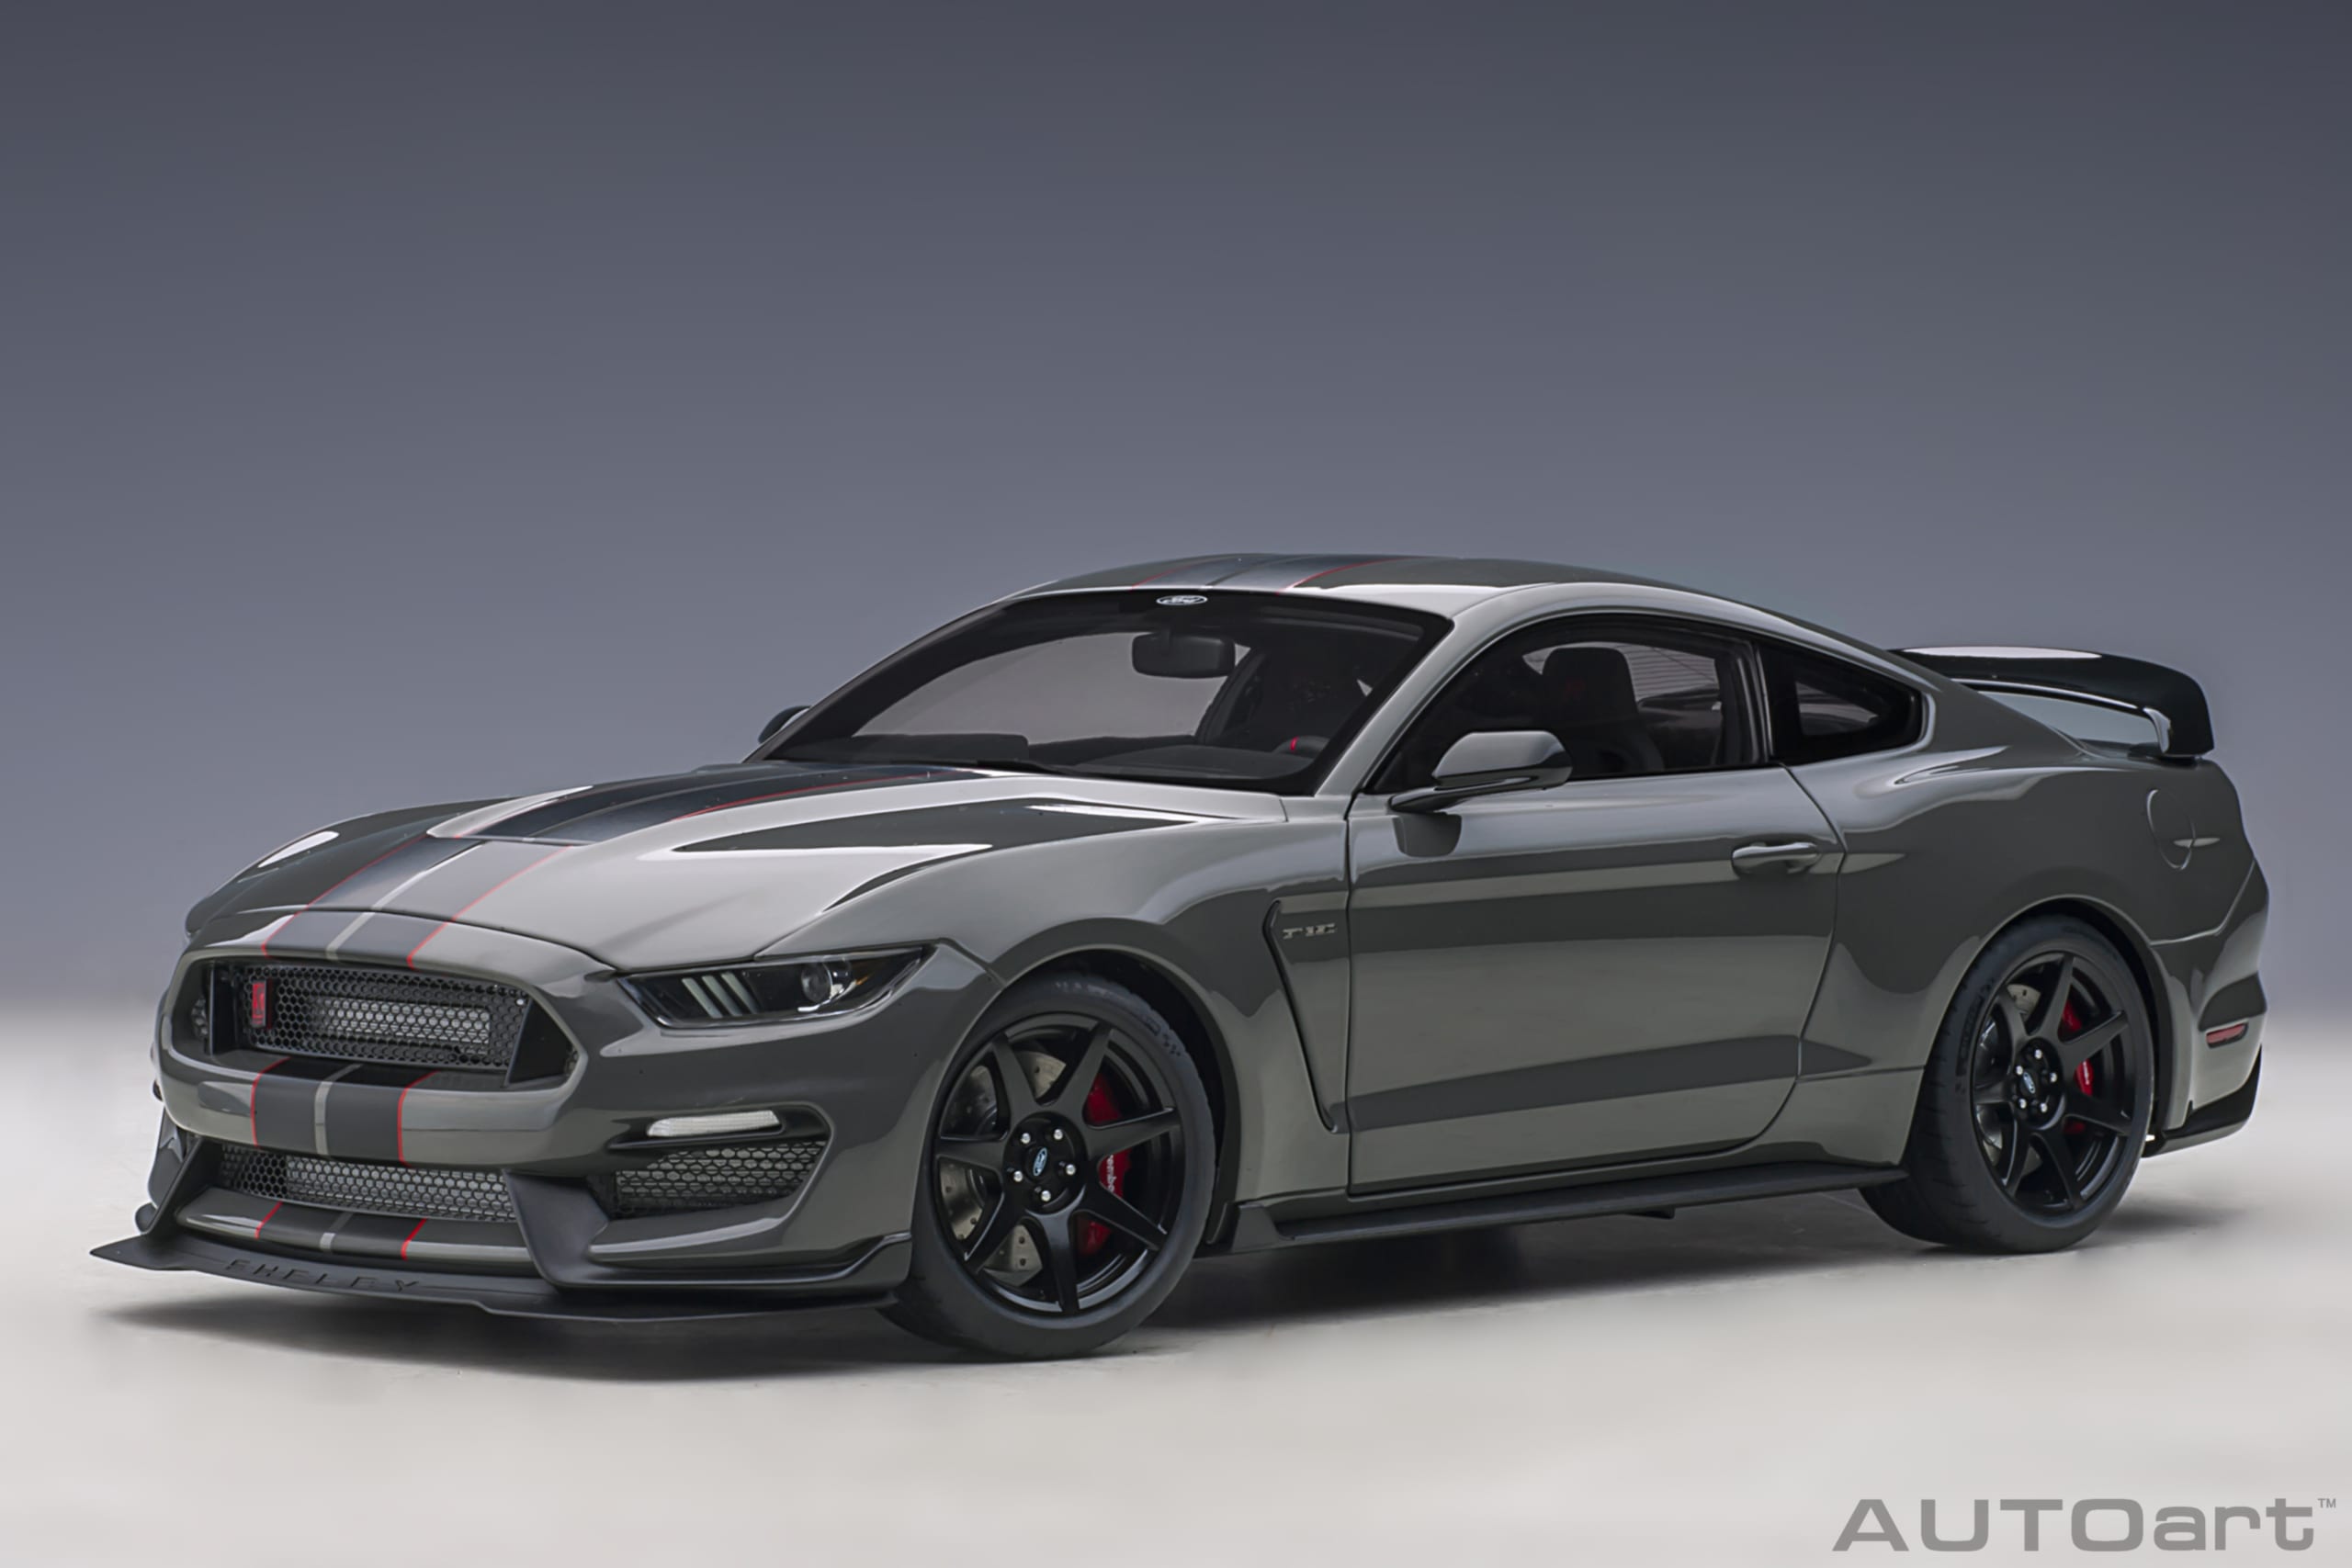 Ford Mustang Shelby Gt 350r Lead Foot Grey With Black Stripes Autoart